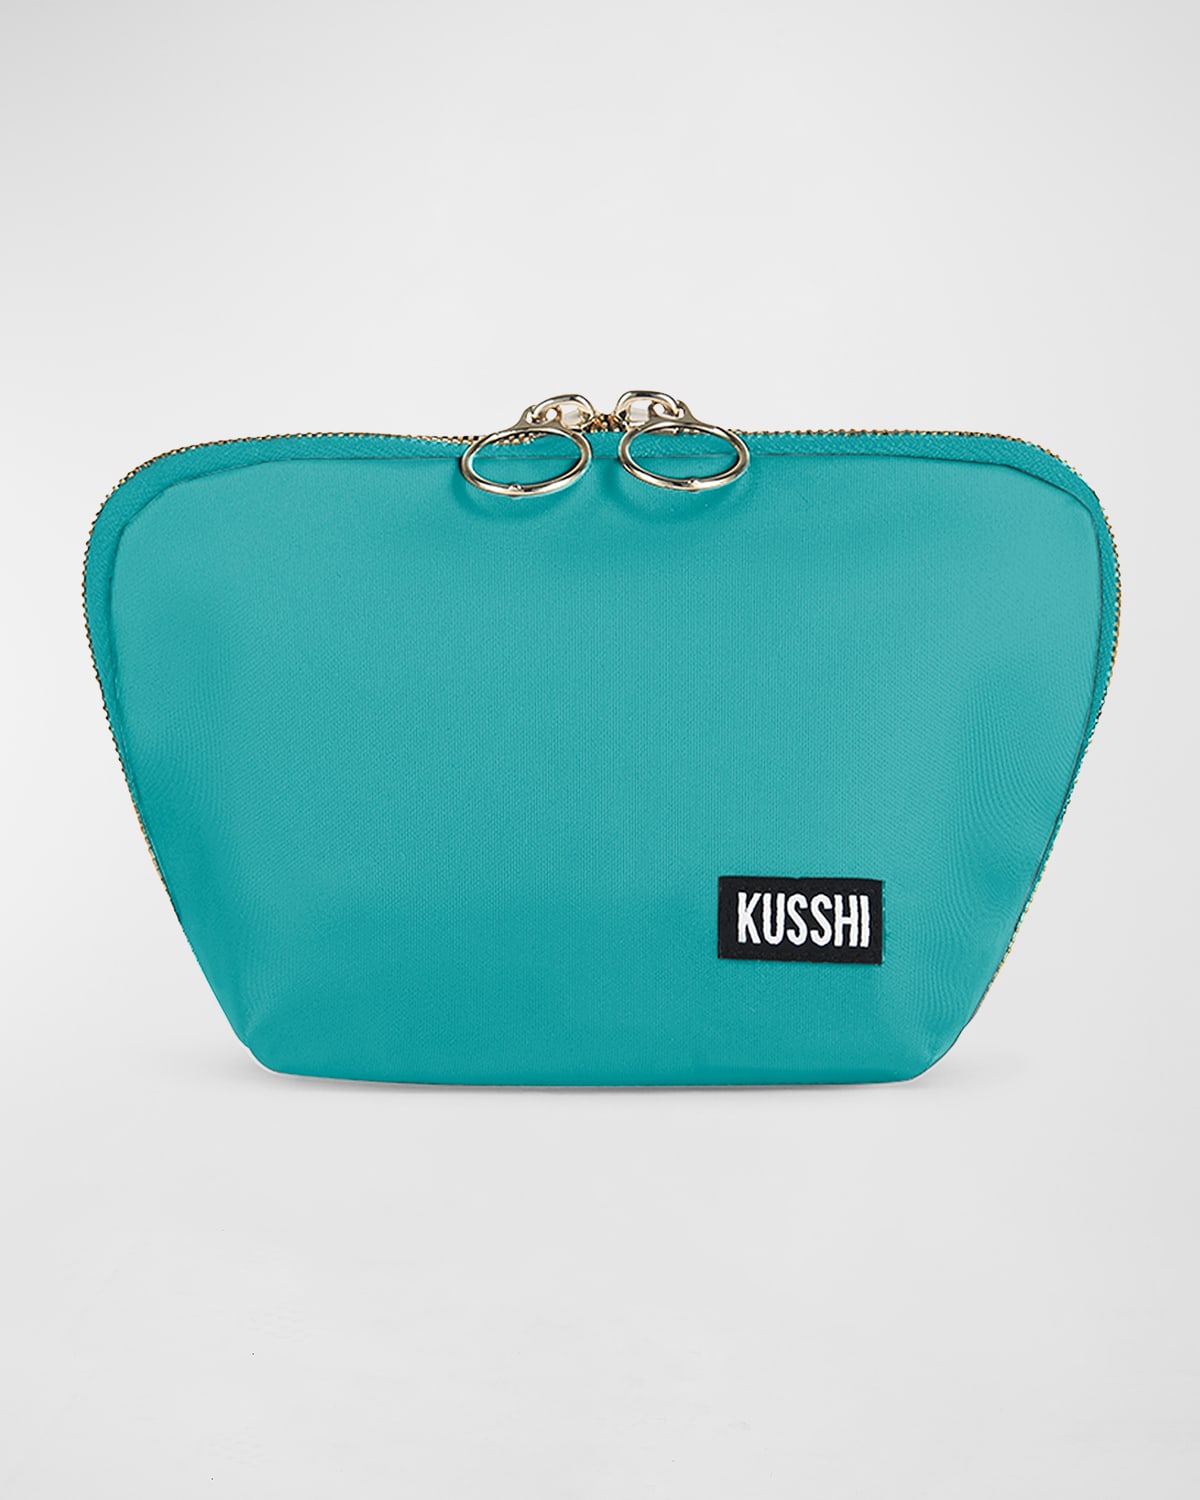 Kusshi Everyday Makeup Bag In Seafoam/ Bright O